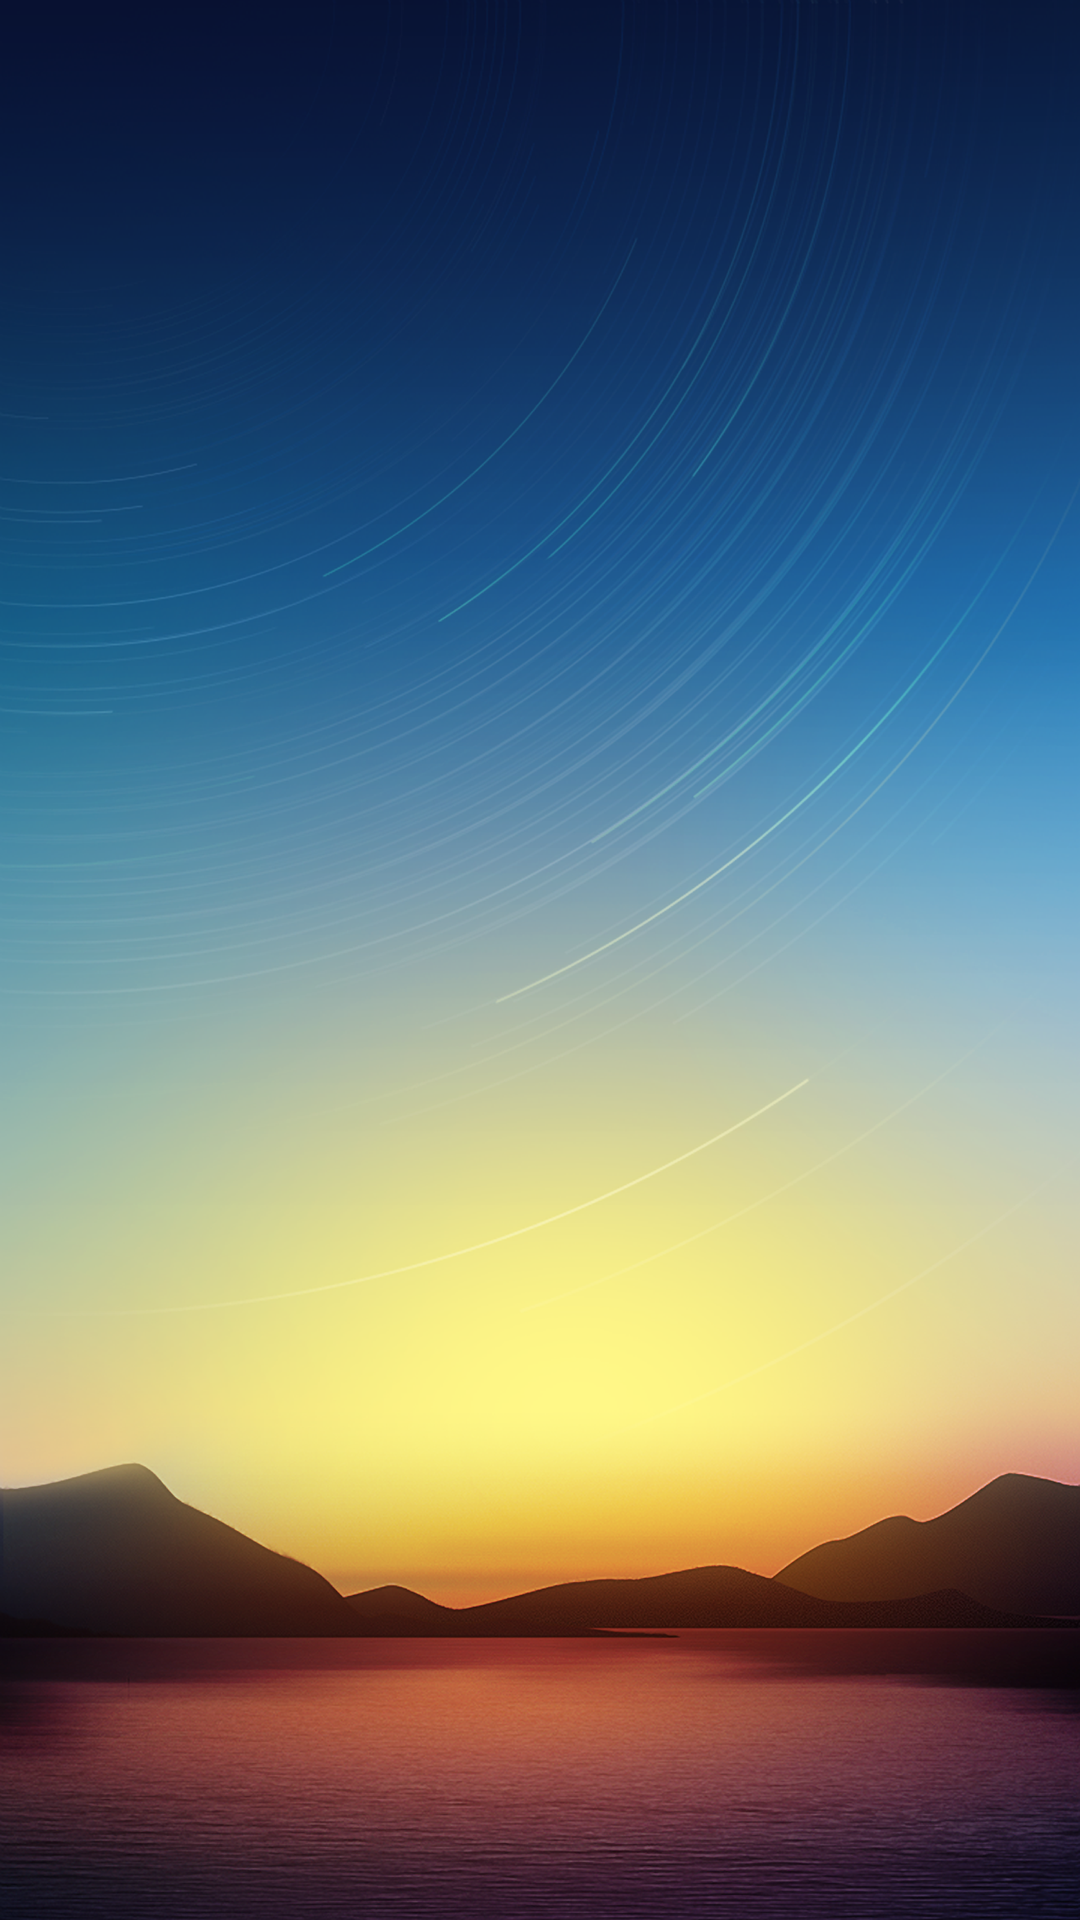 Sunset htc one wallpaper - Best htc one wallpapers, free and easy ...